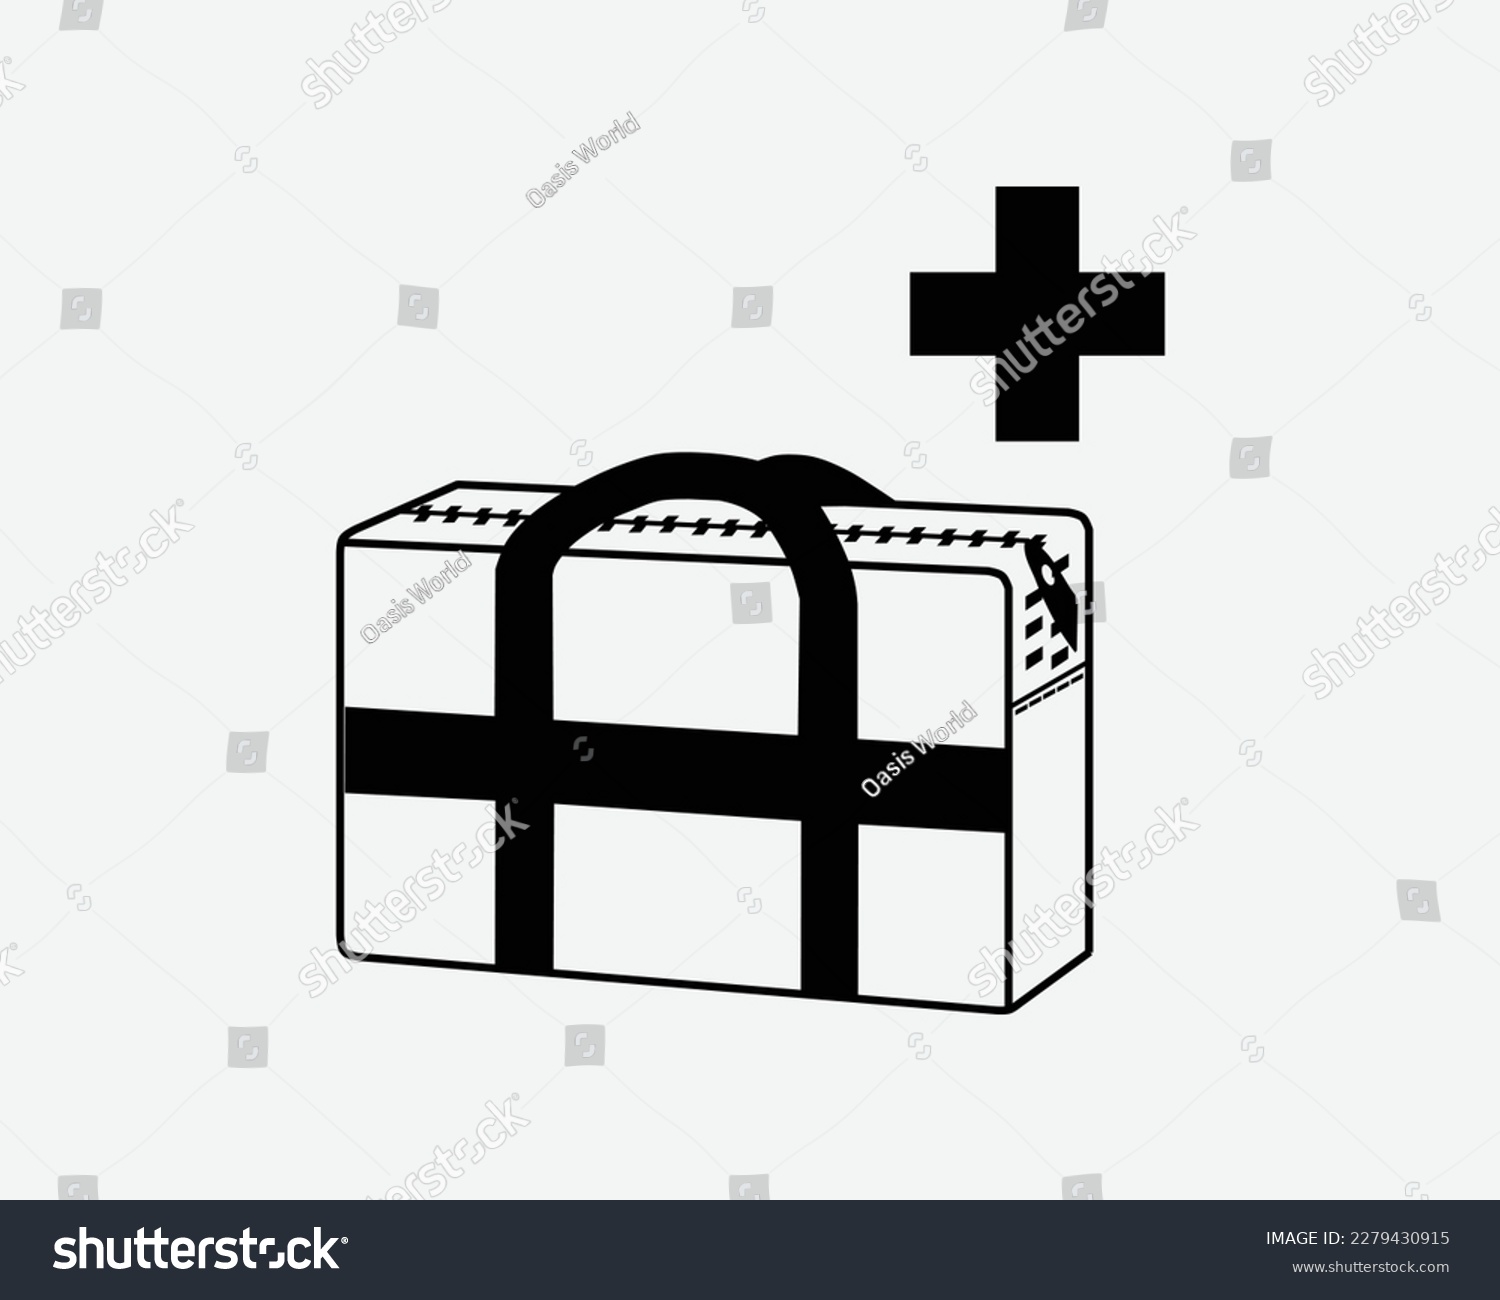 SVG of Medical Bag Medic Healthcare Supplies Carry First Aid Black White Silhouette Sign Symbol Icon Graphic Clipart Artwork Illustration Pictogram Vector svg